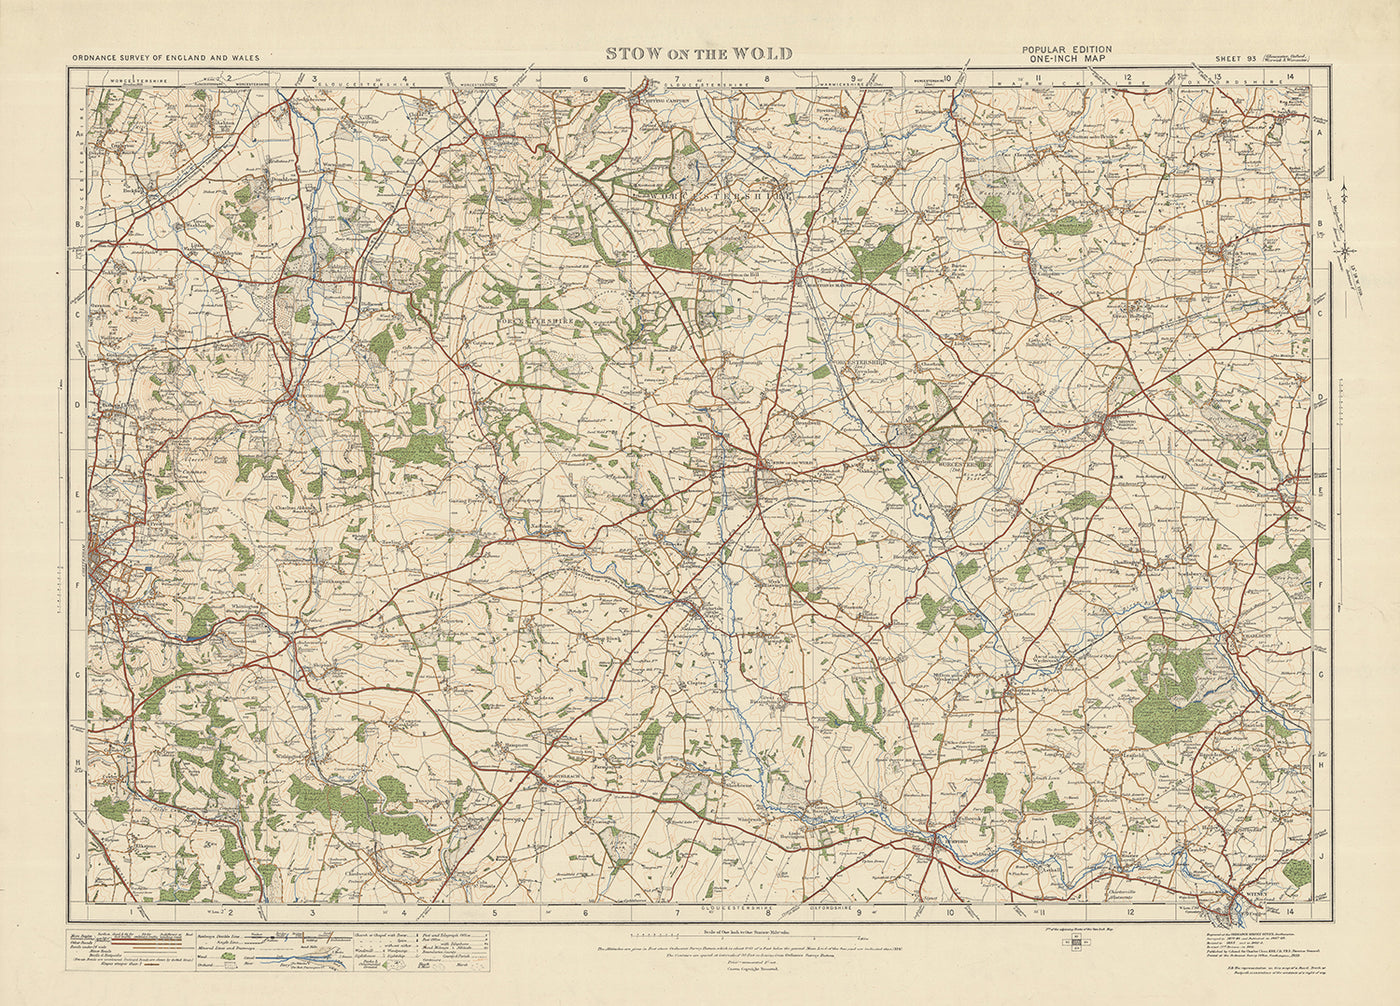 Old Ordnance Survey Map, Sheet 93 - Stow on the Wold, 1925: Moreton-in-Marsh, Chipping Norton, Bourton-on-the-Water, Witney, Cotswolds AONB